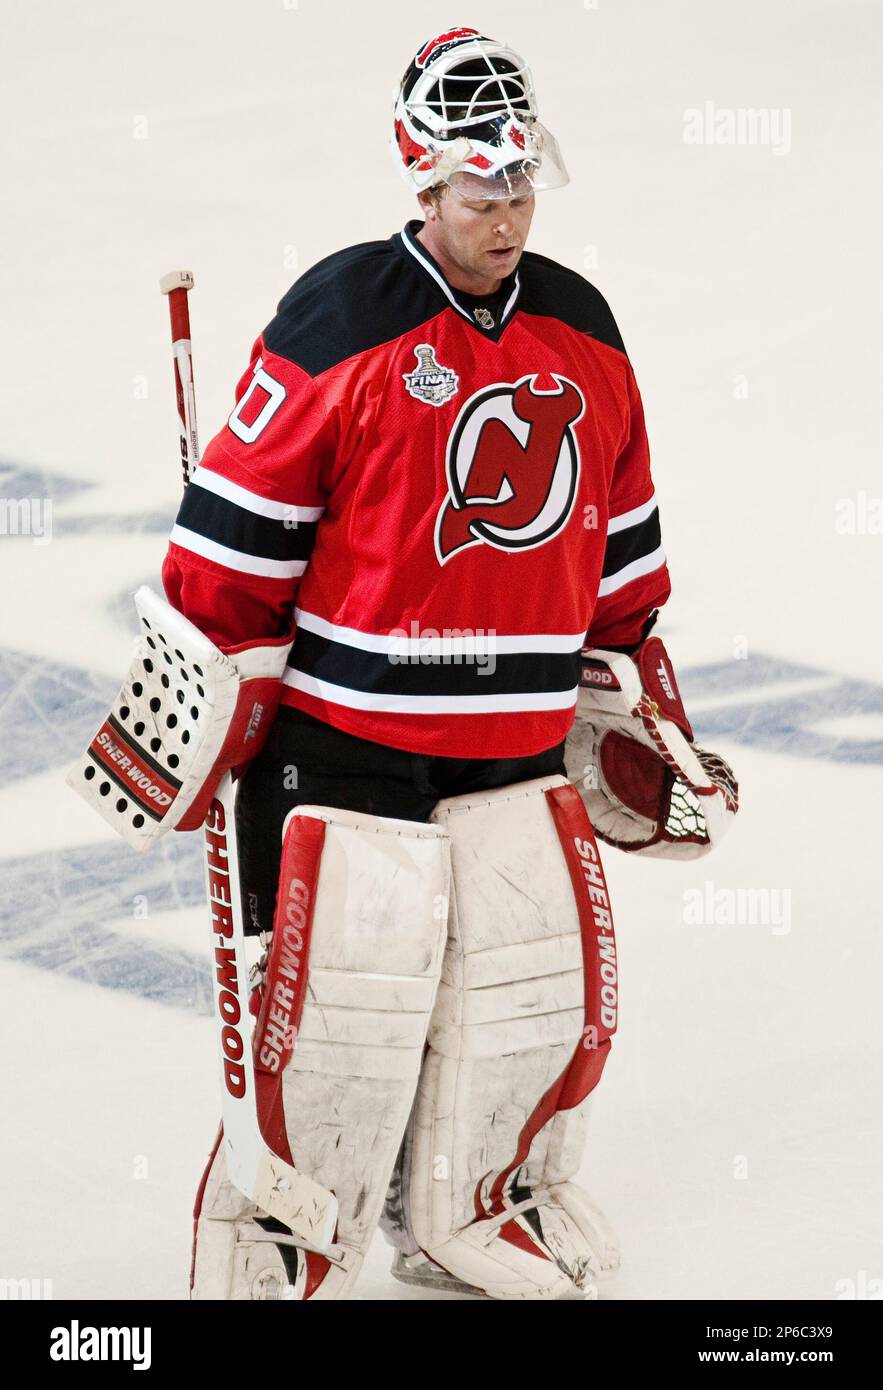 2012 Stanley Cup Finals, Game 6 Preview: New Jersey Devils at Los